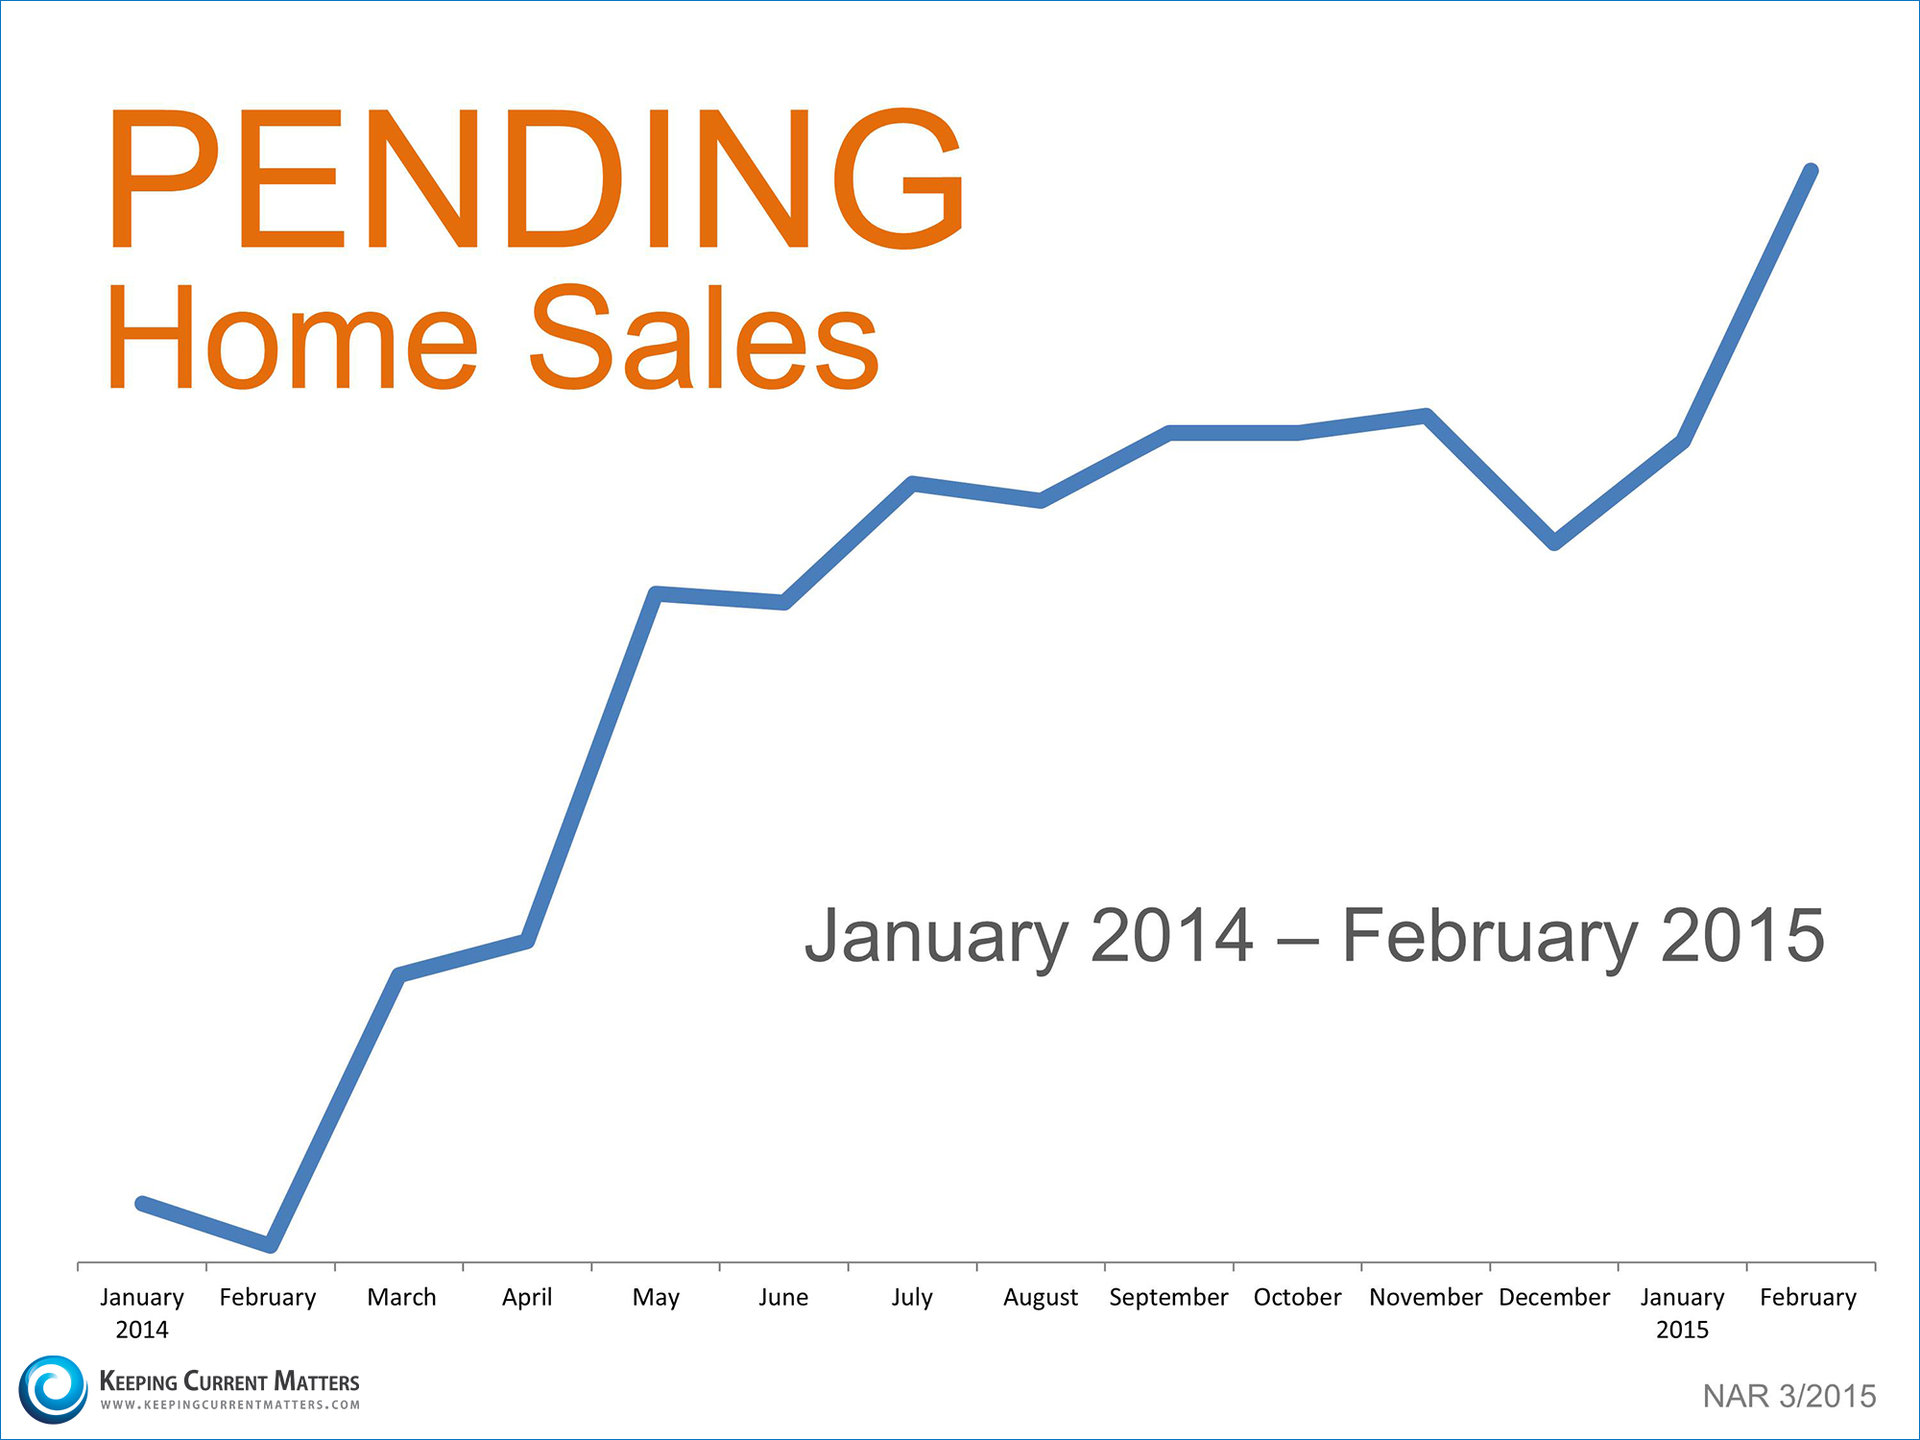 Pending Home Sales | Keeping Current Matters